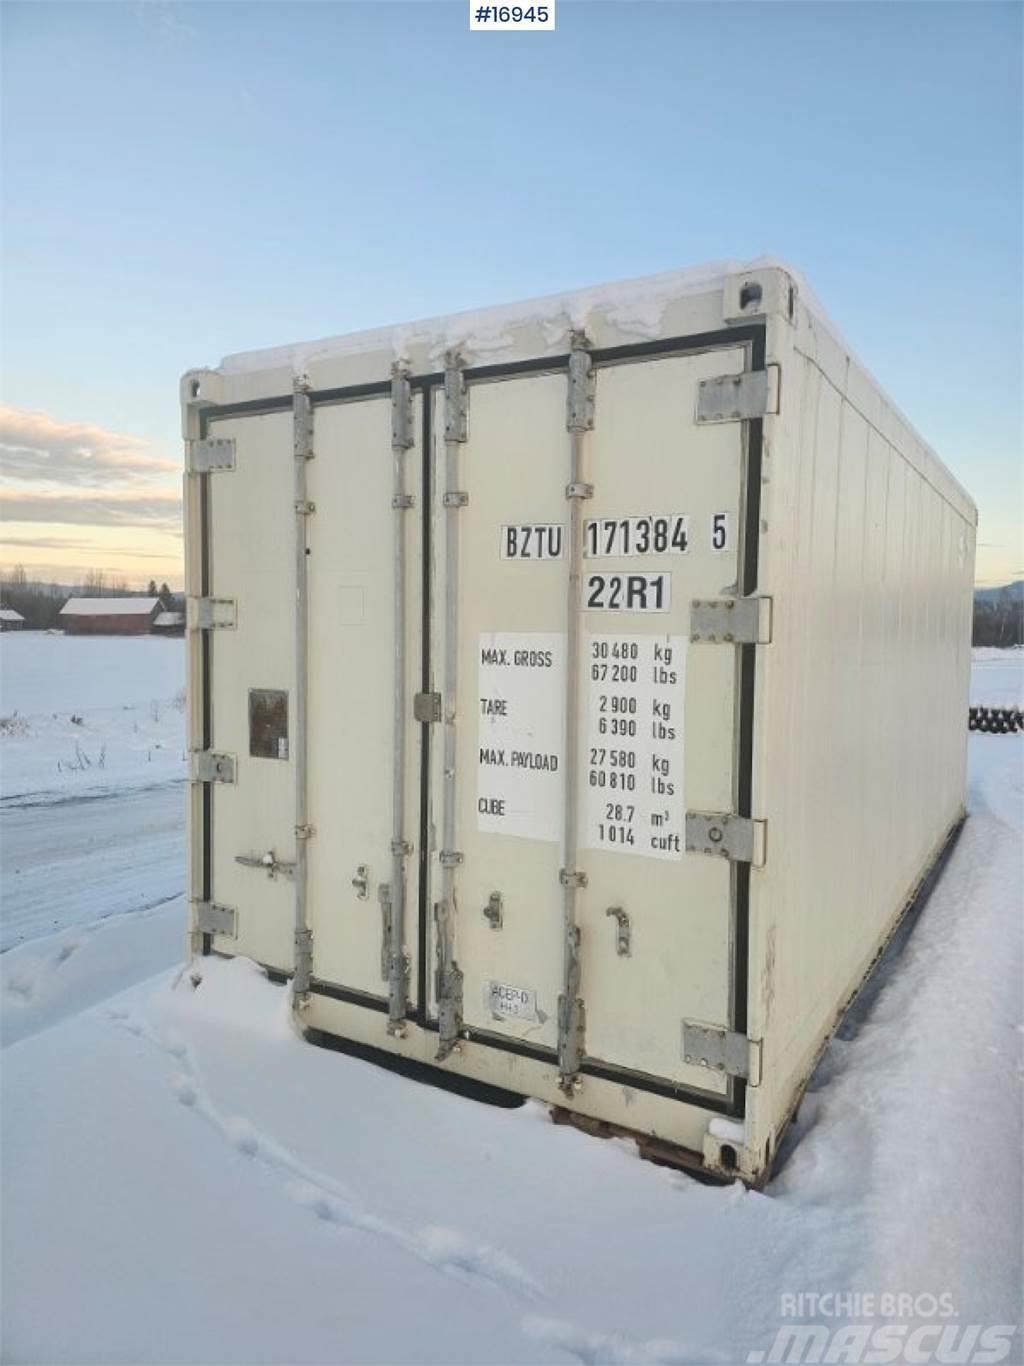  Kjølecontainer m/ Thermo king aggregat Інше